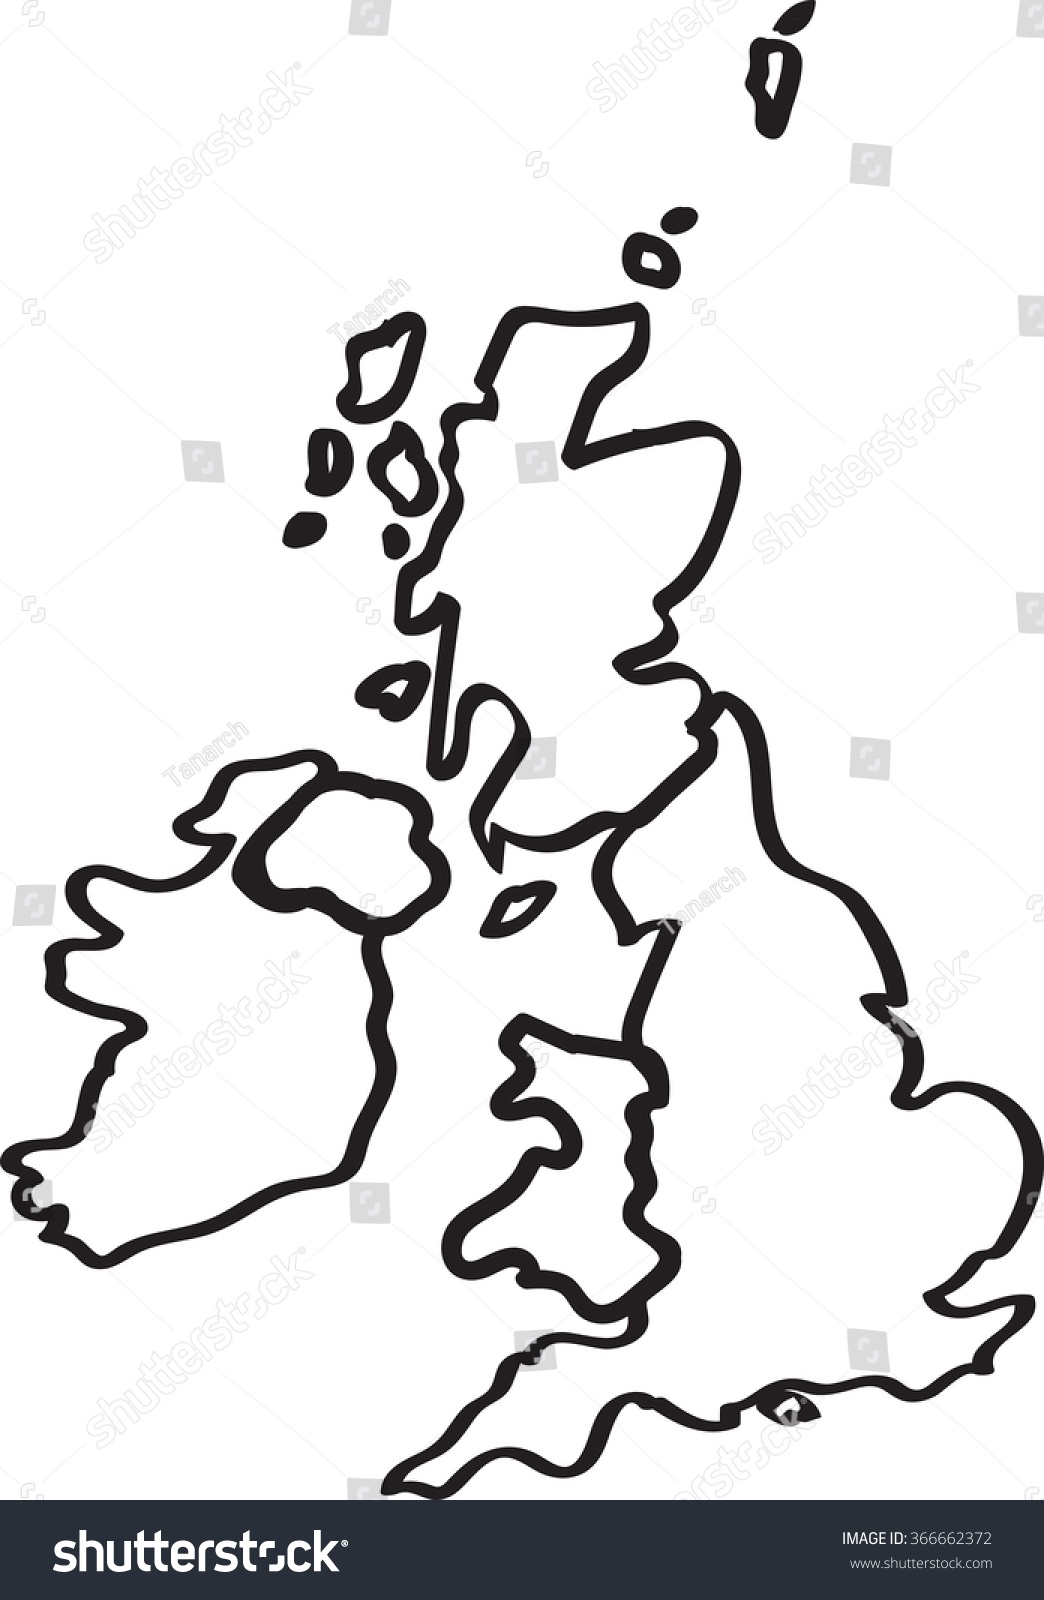 Doodle Freehand Outline Sketch Great Britain Stock Vector ...